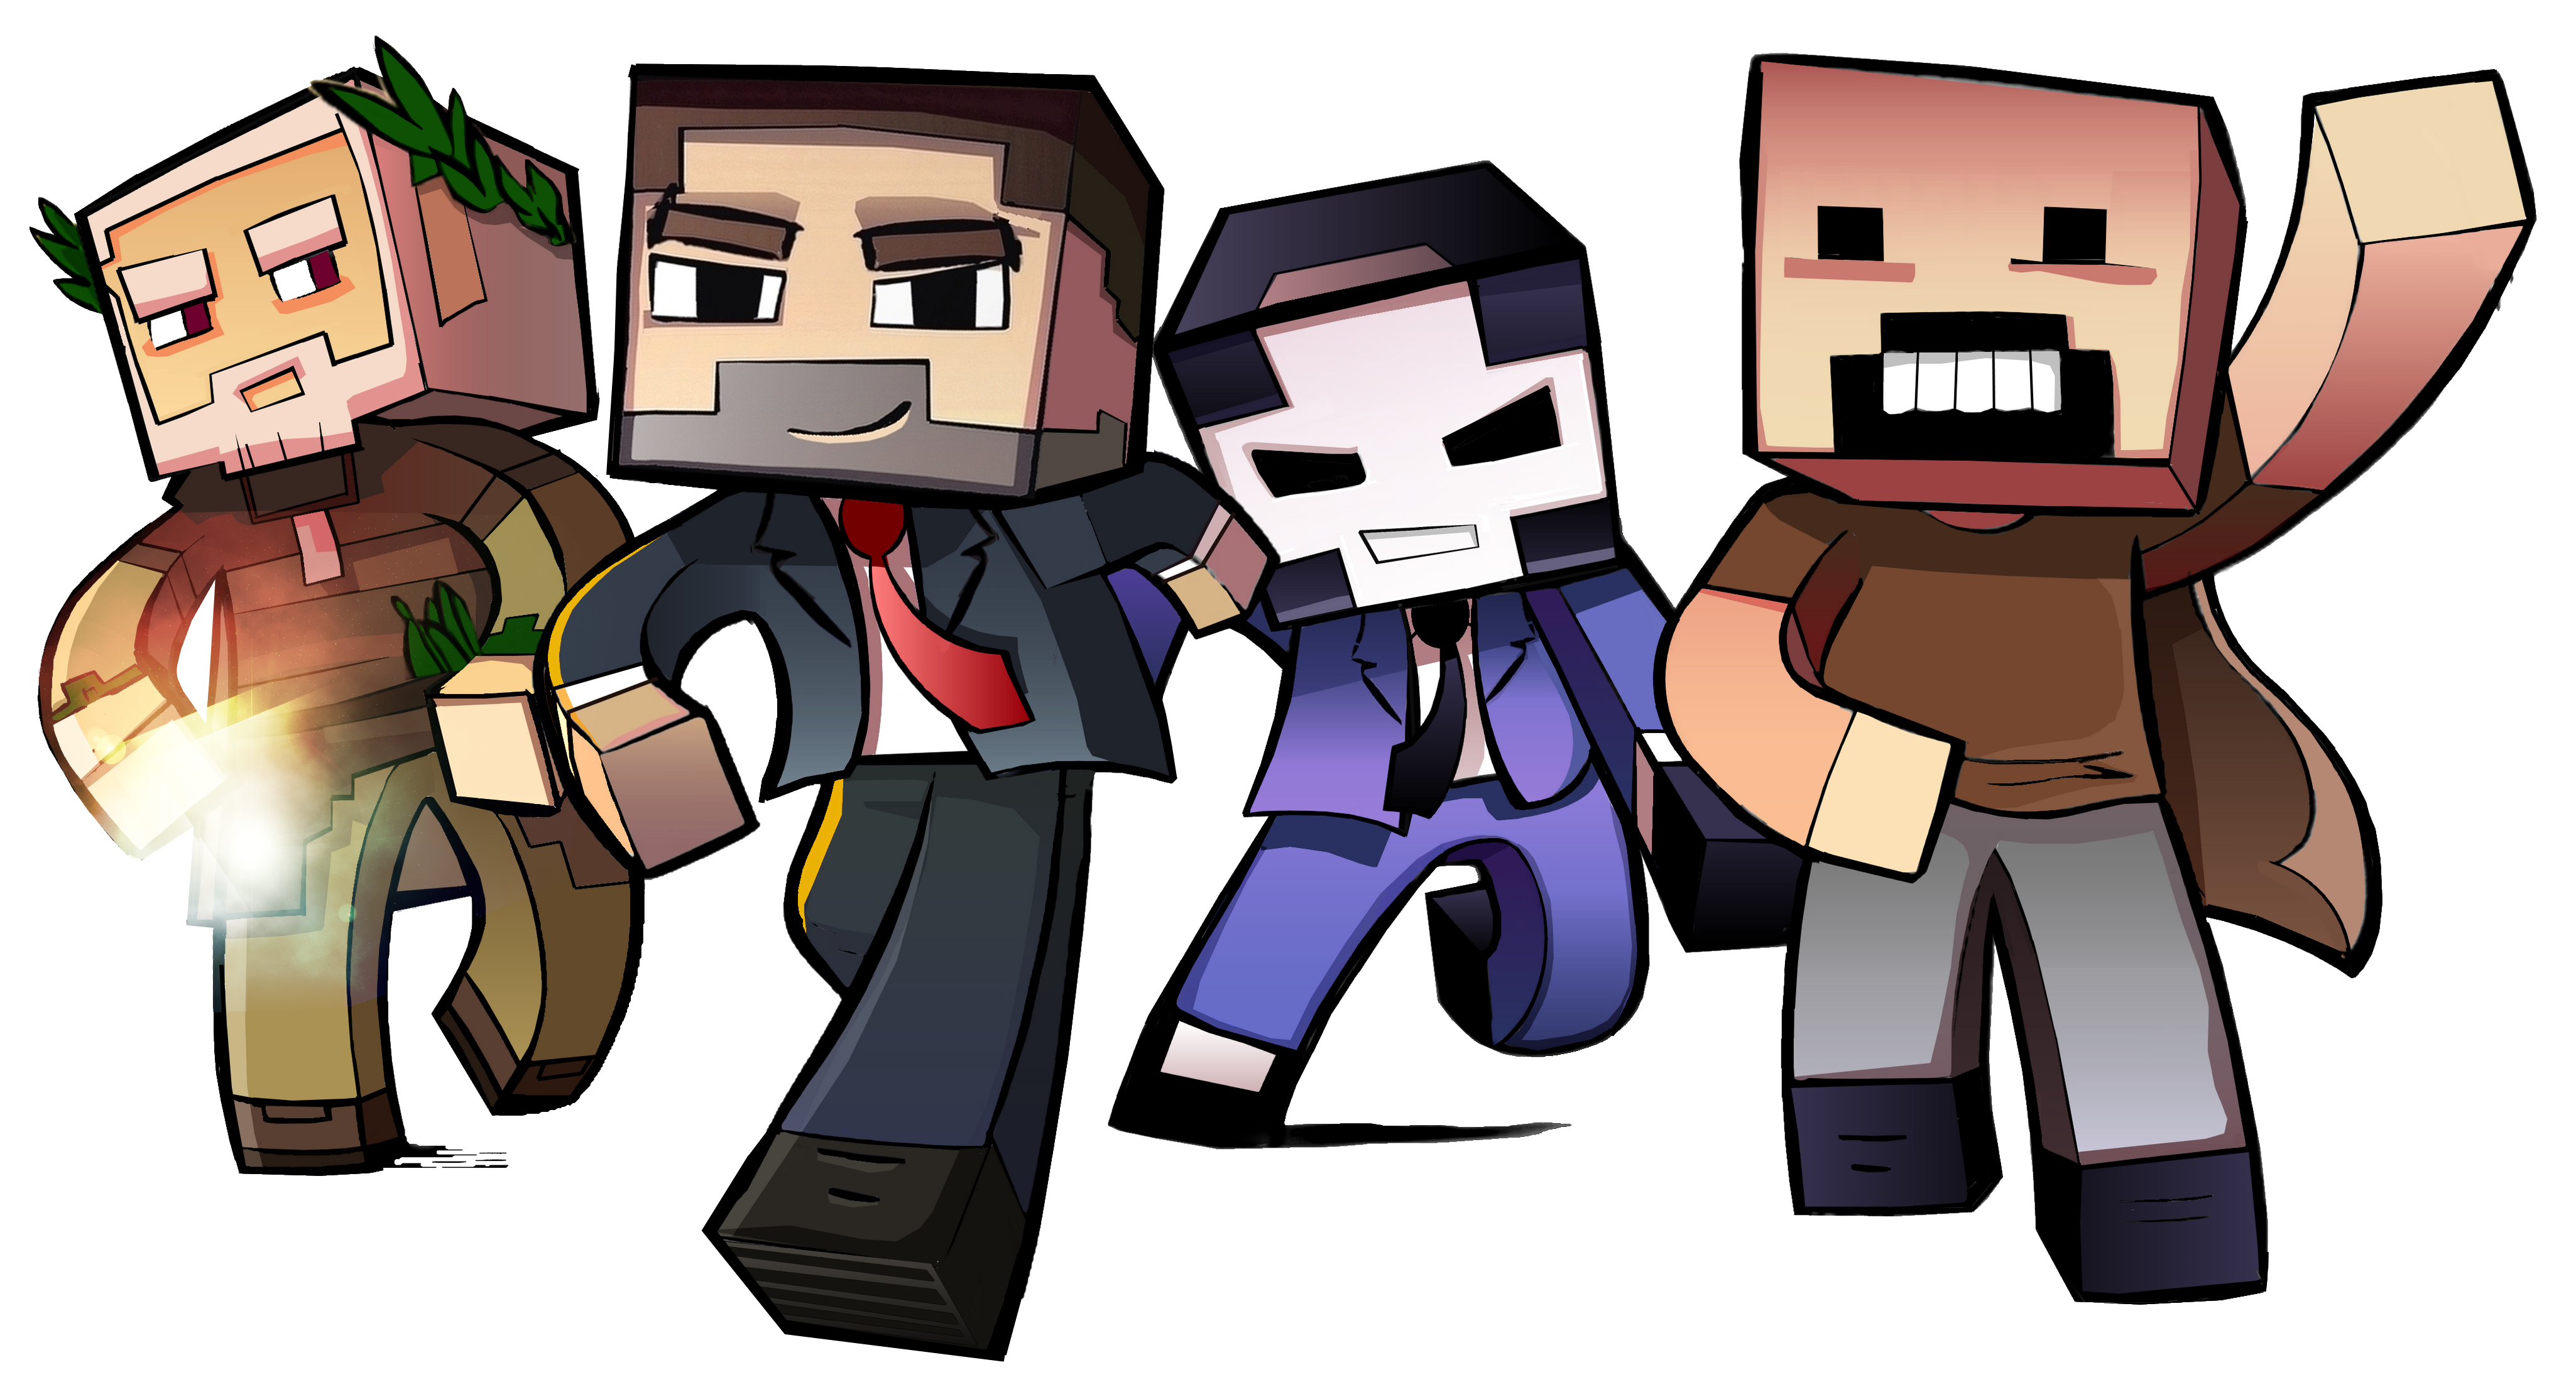 minecraft_by_enr1-d5lcr5k.png